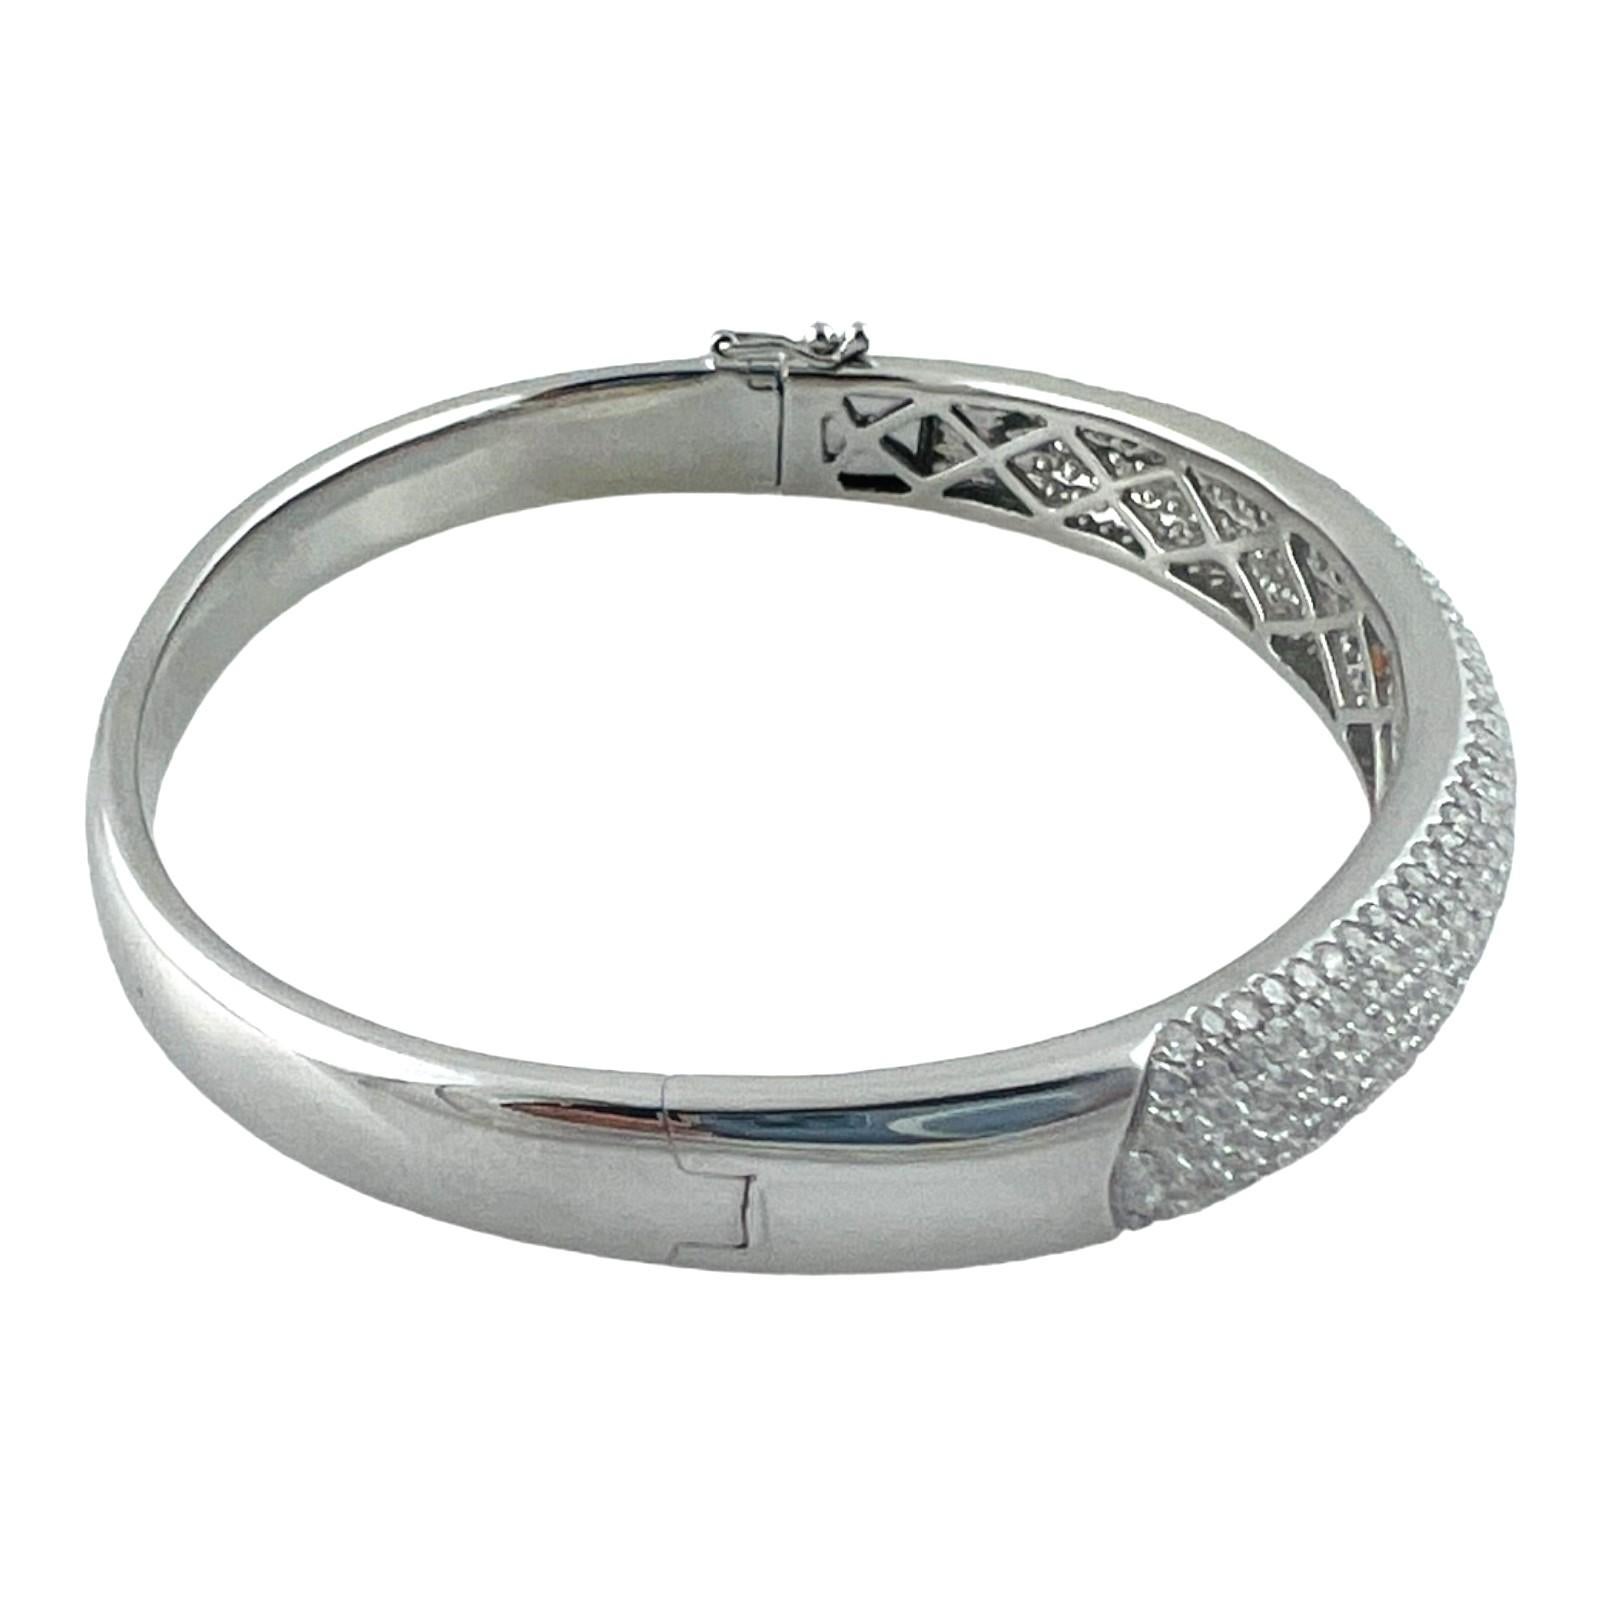 18K White Gold Pave Diamond Bangle Bracelet In Good Condition For Sale In Washington Depot, CT